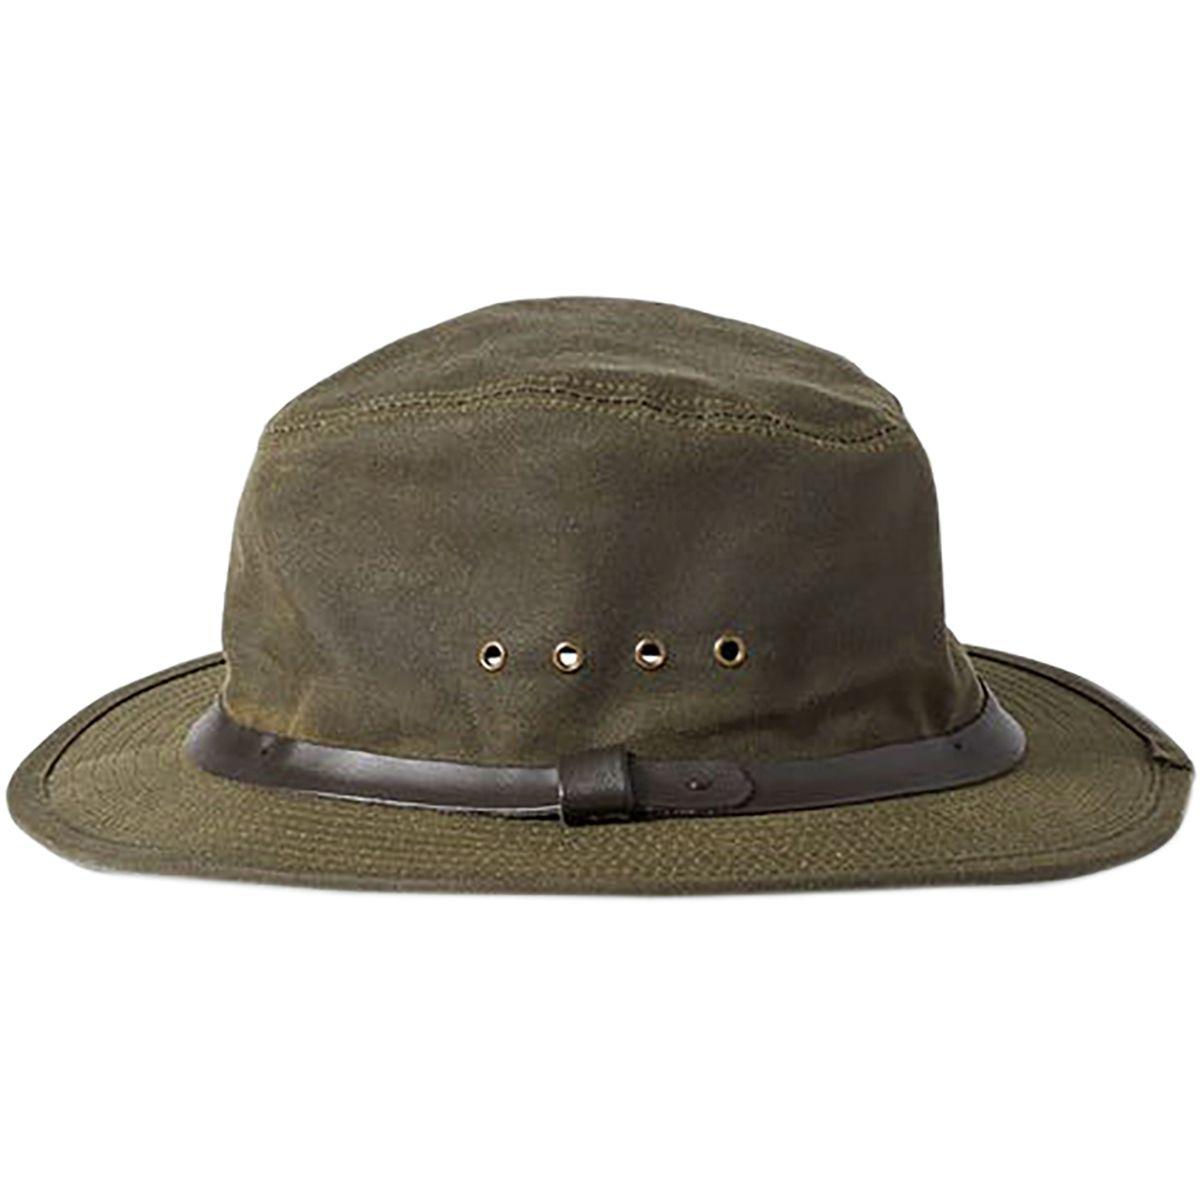 Filson Cotton Tin Cloth Packer Hat in Green for Men - Lyst